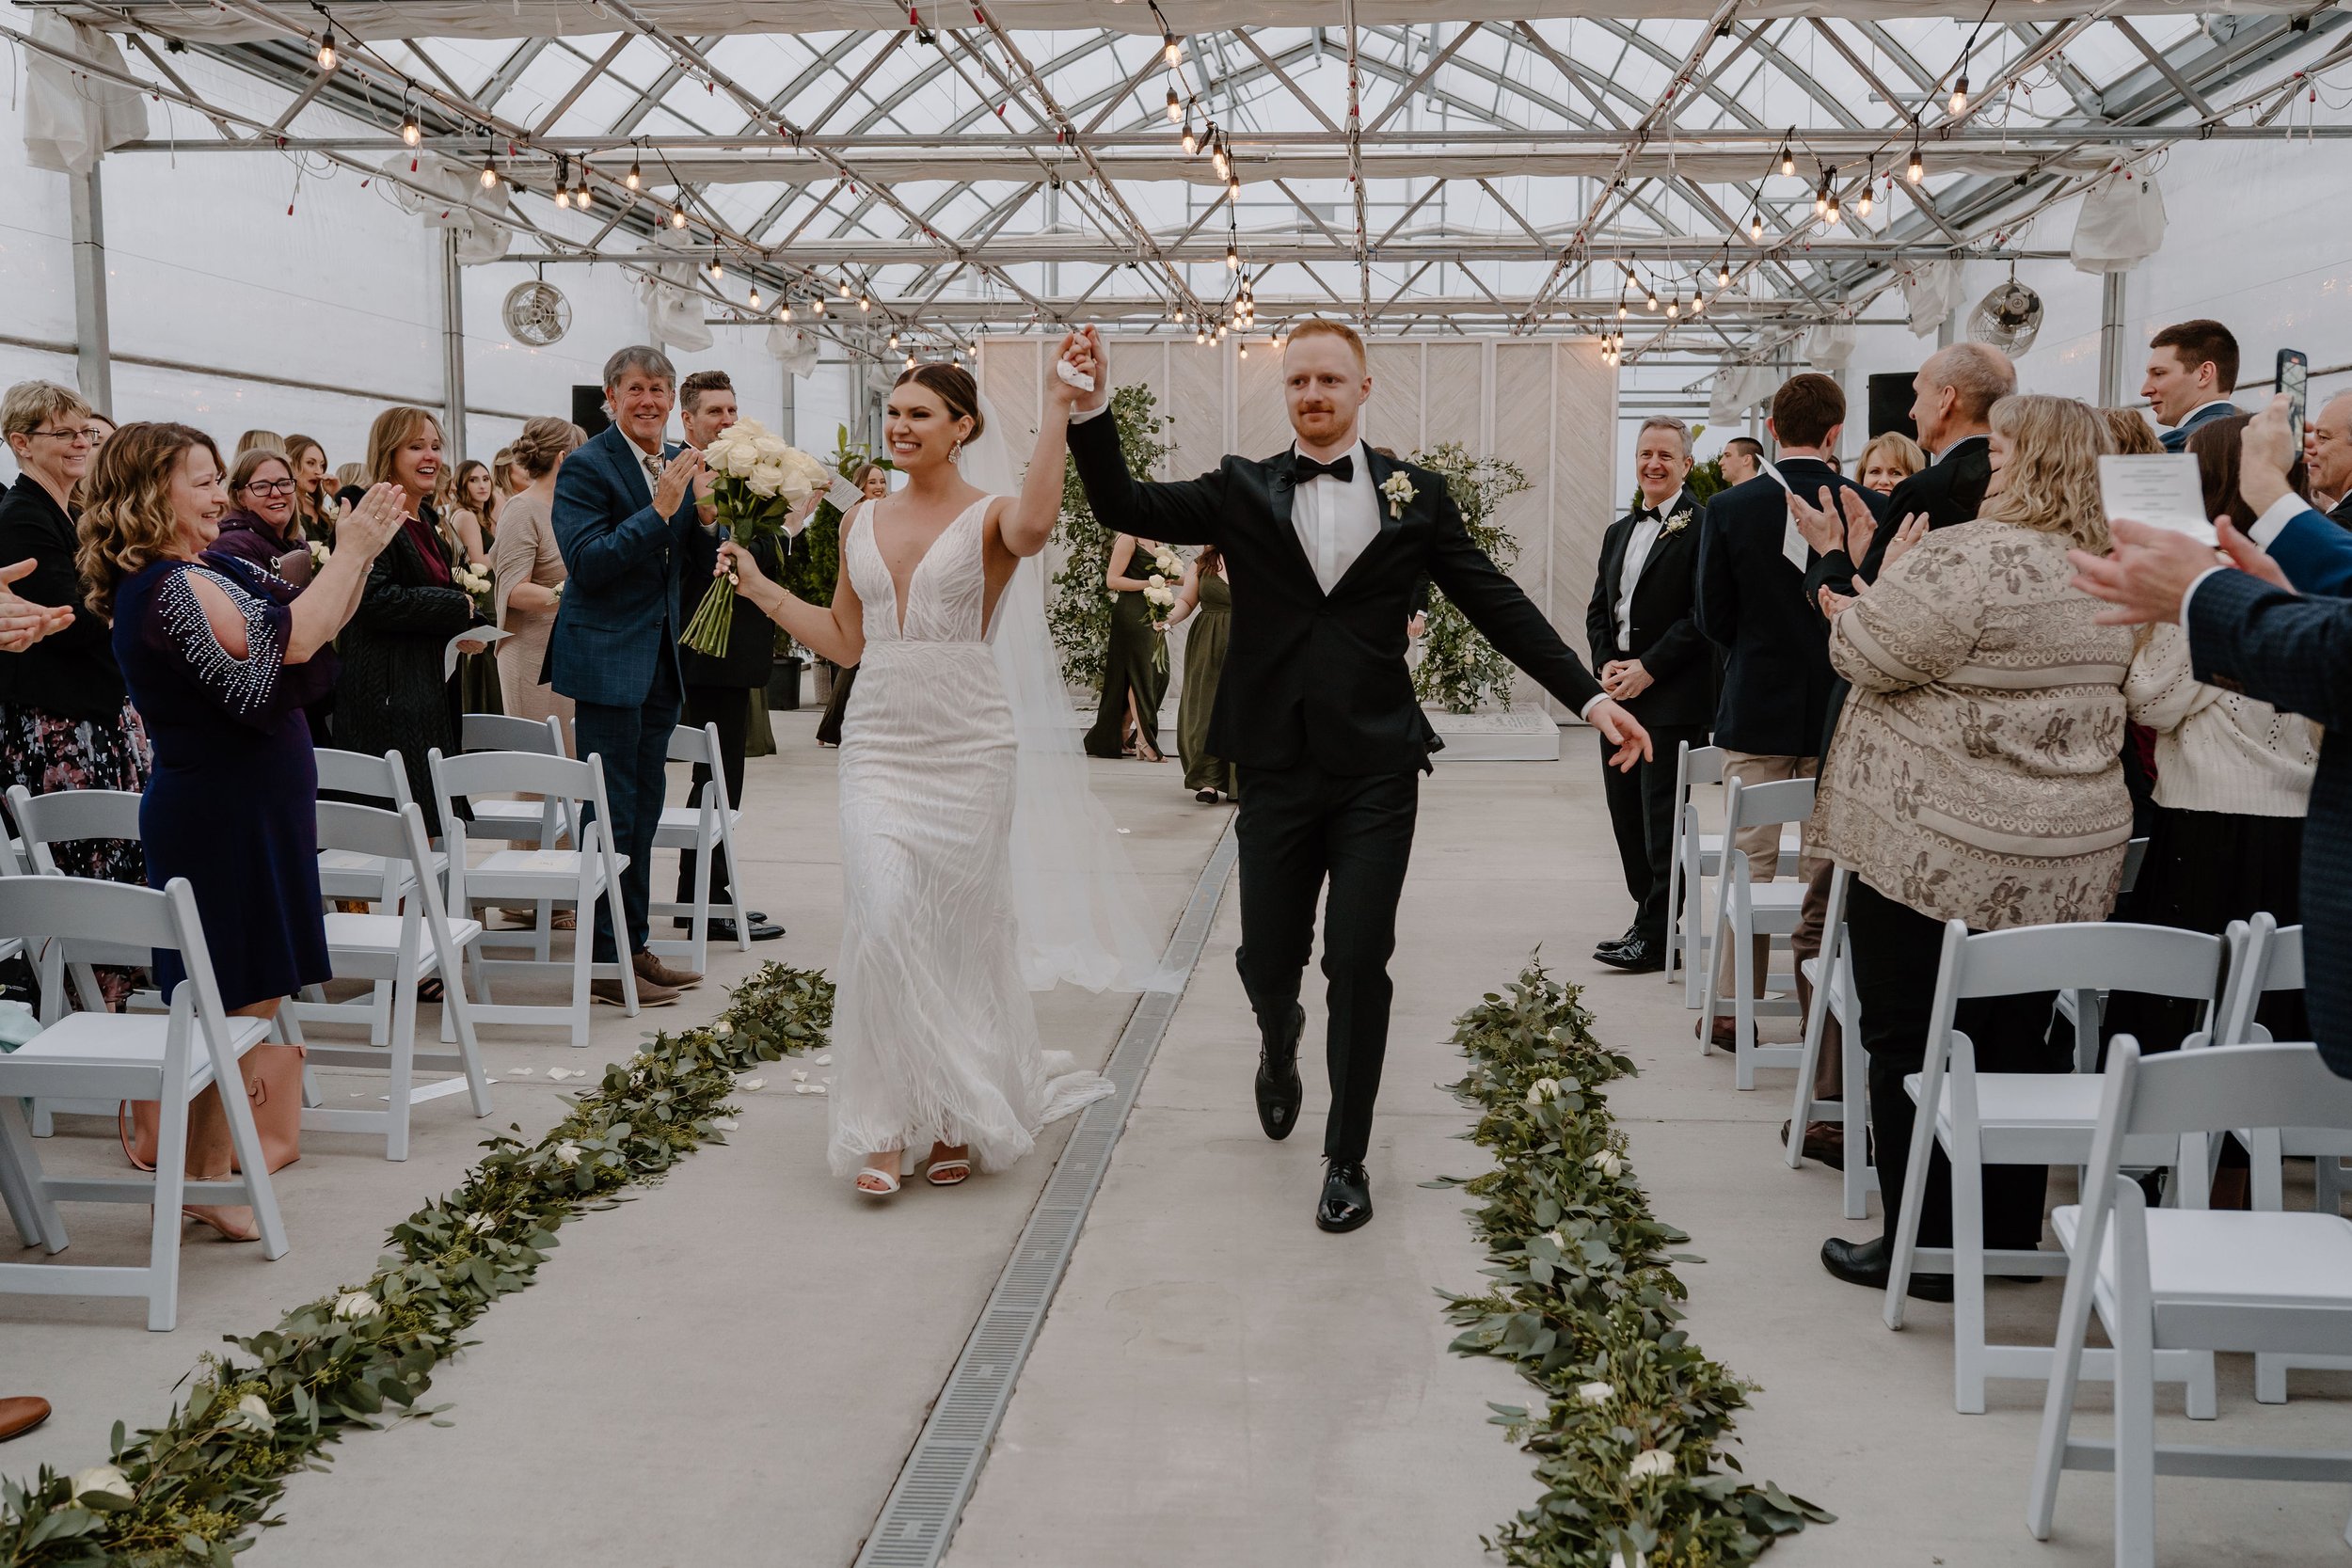  “Farm 12 was everything we could have asked for in a venue and more! All 3 spaces are stunning and unique and it provided the best flow from ceremony to happy hour to reception. The staff truly could not have been more professional and helpful and a